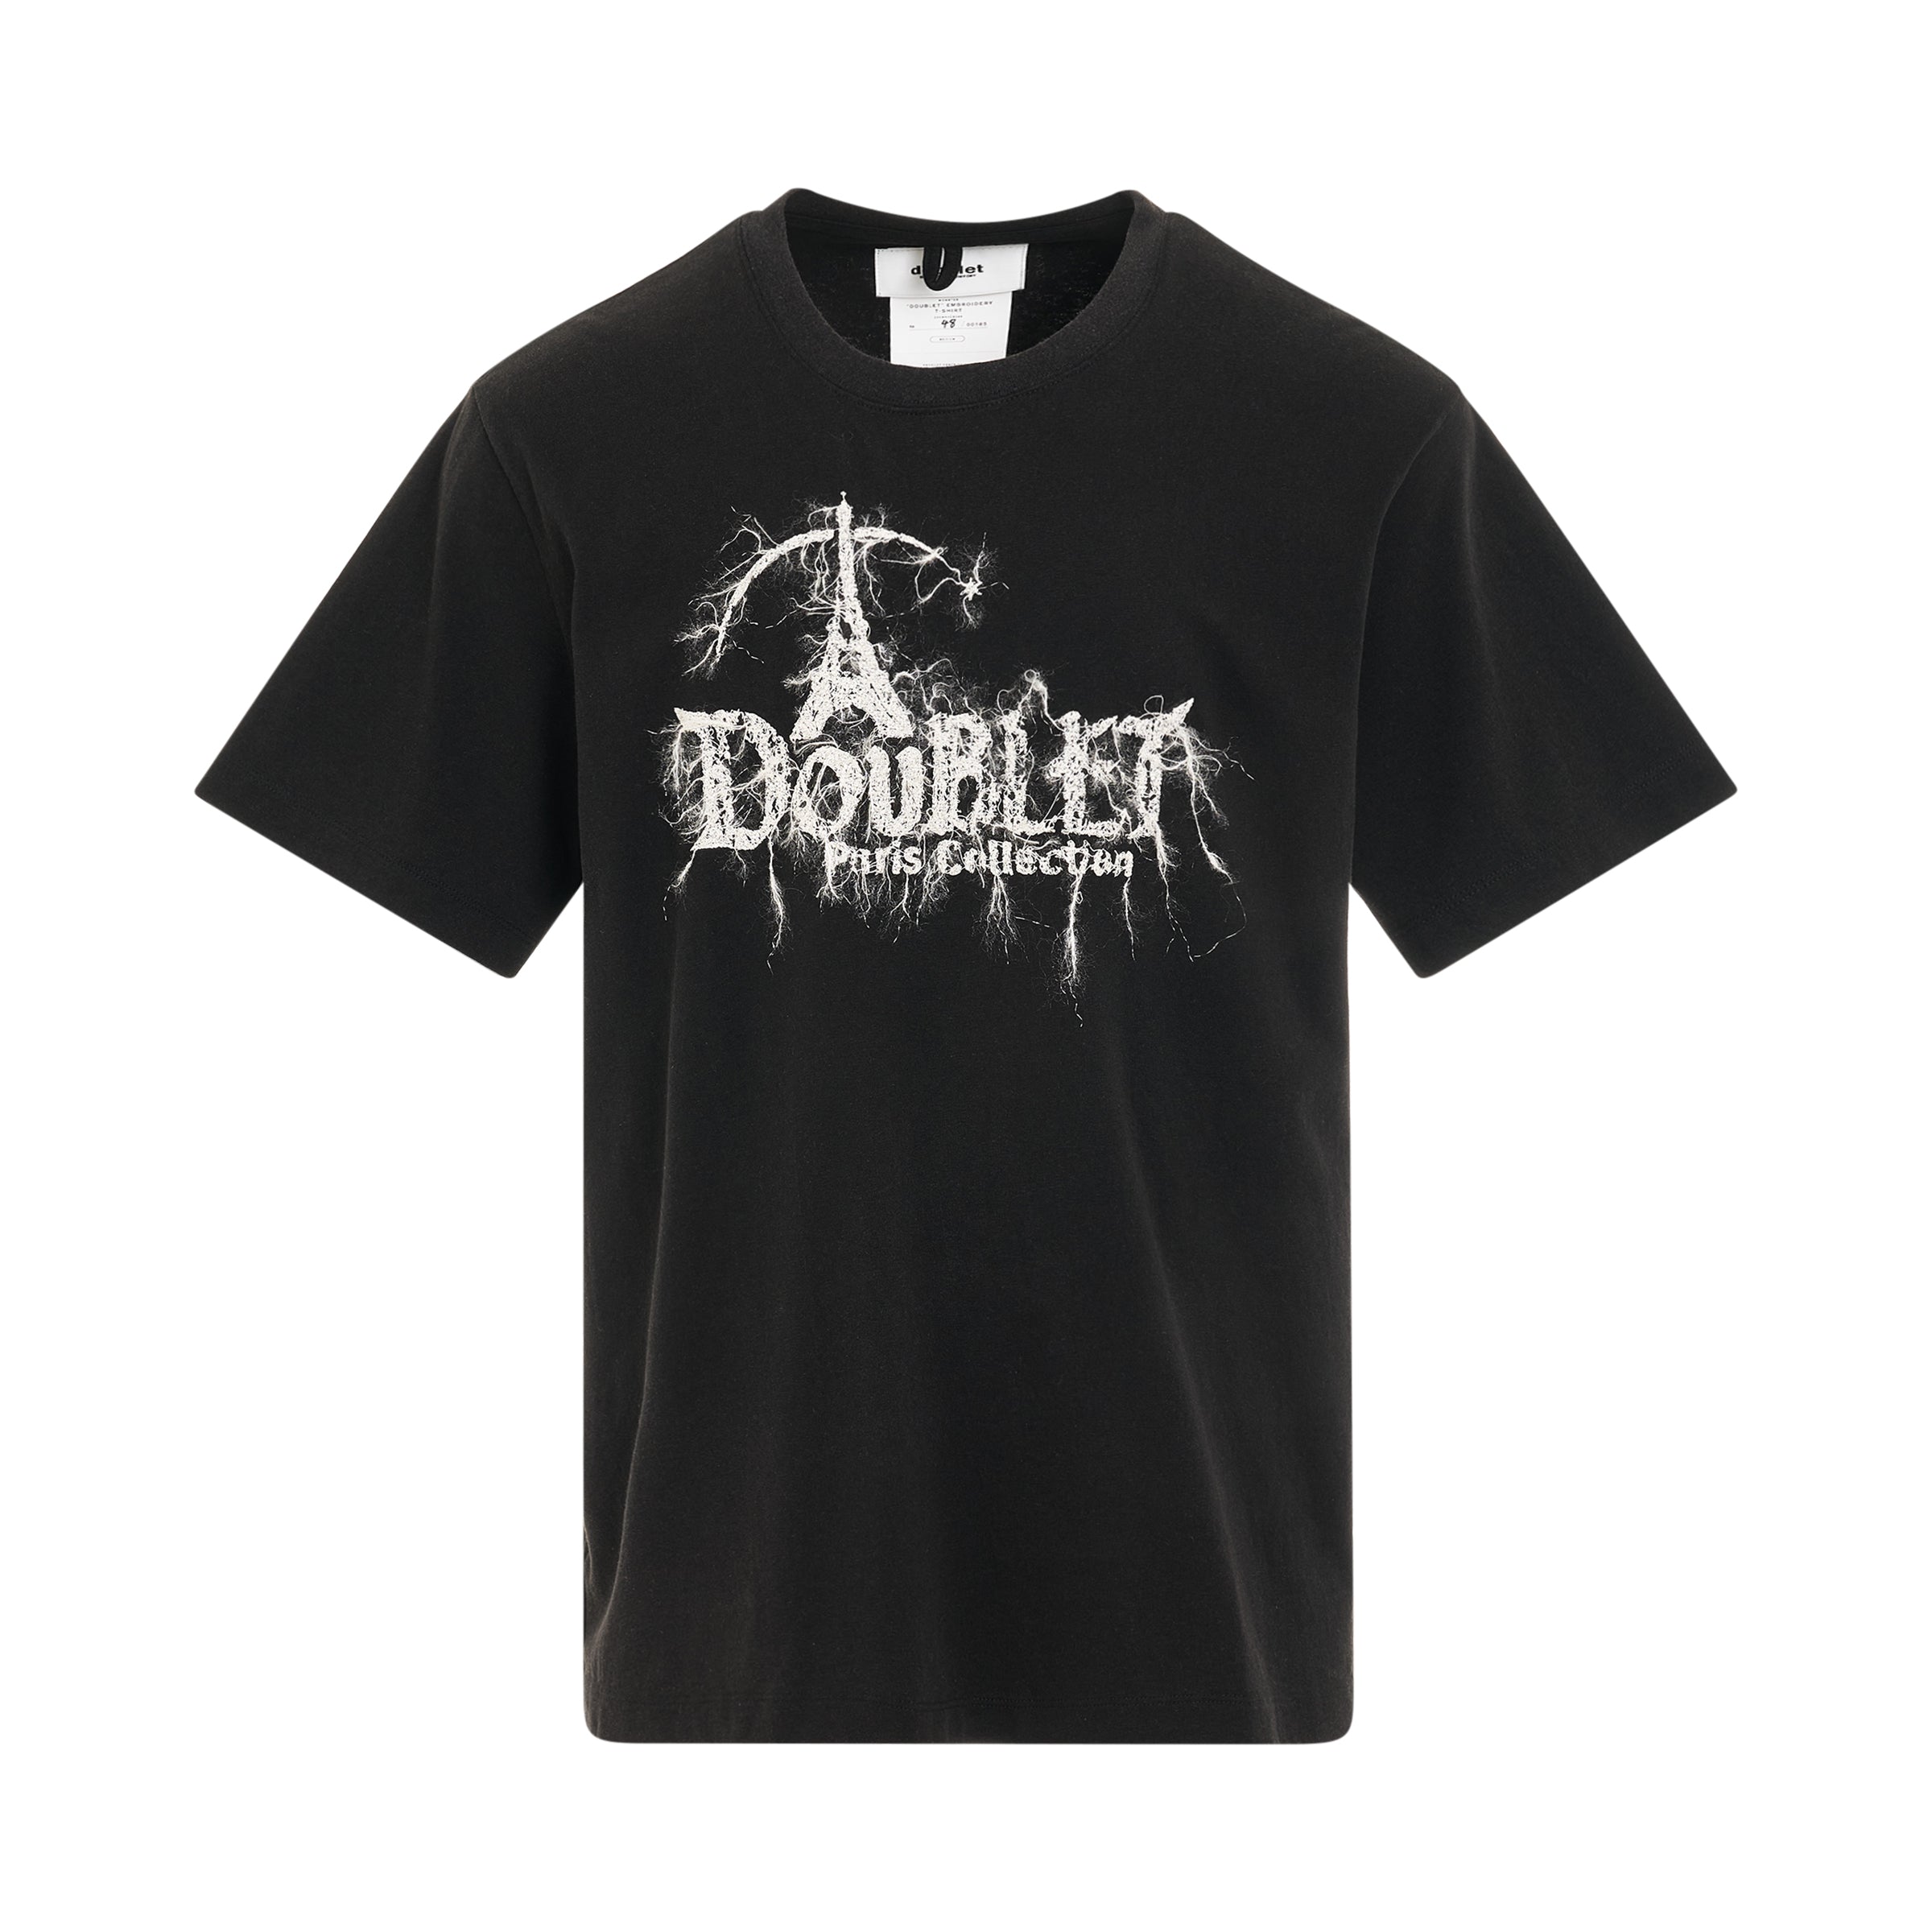 "DOUBLAND" Embroidery T-Shirt in Black